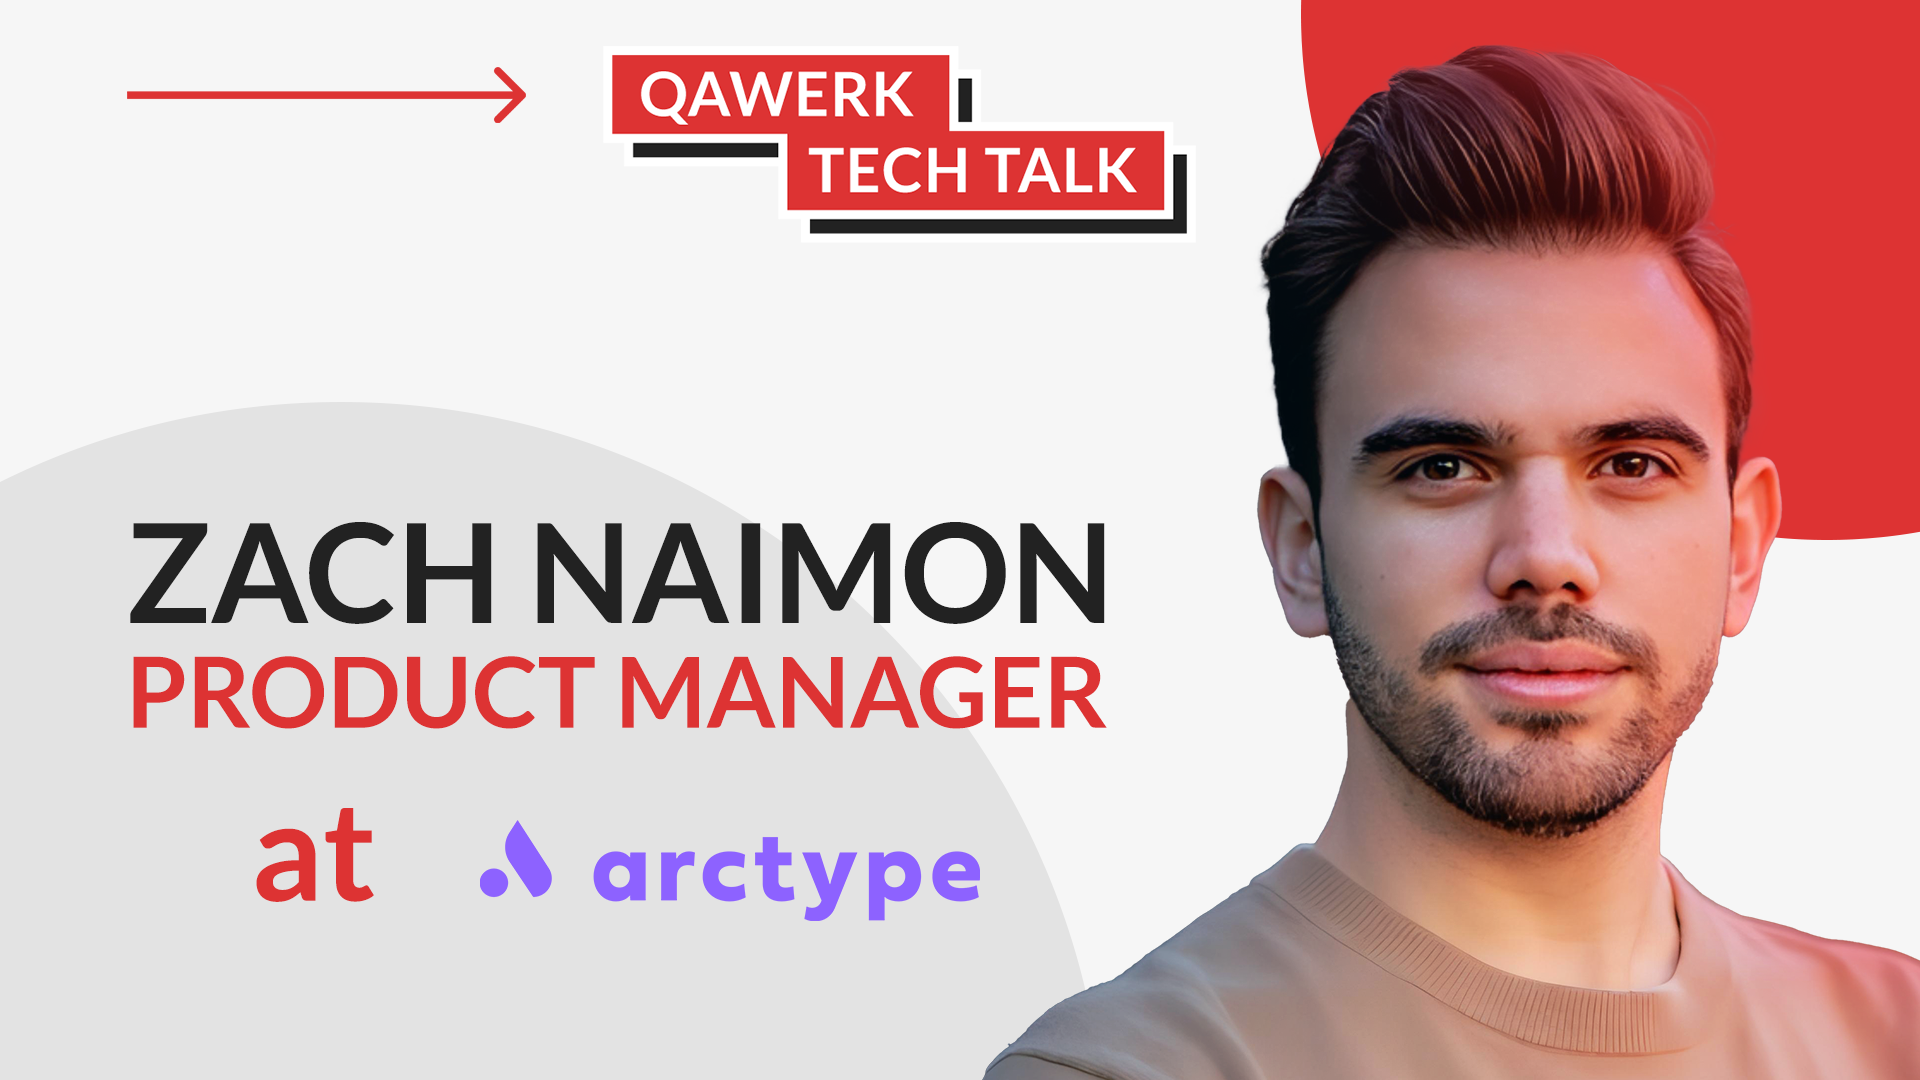 TechTalk with Zach Naimon from Arctype